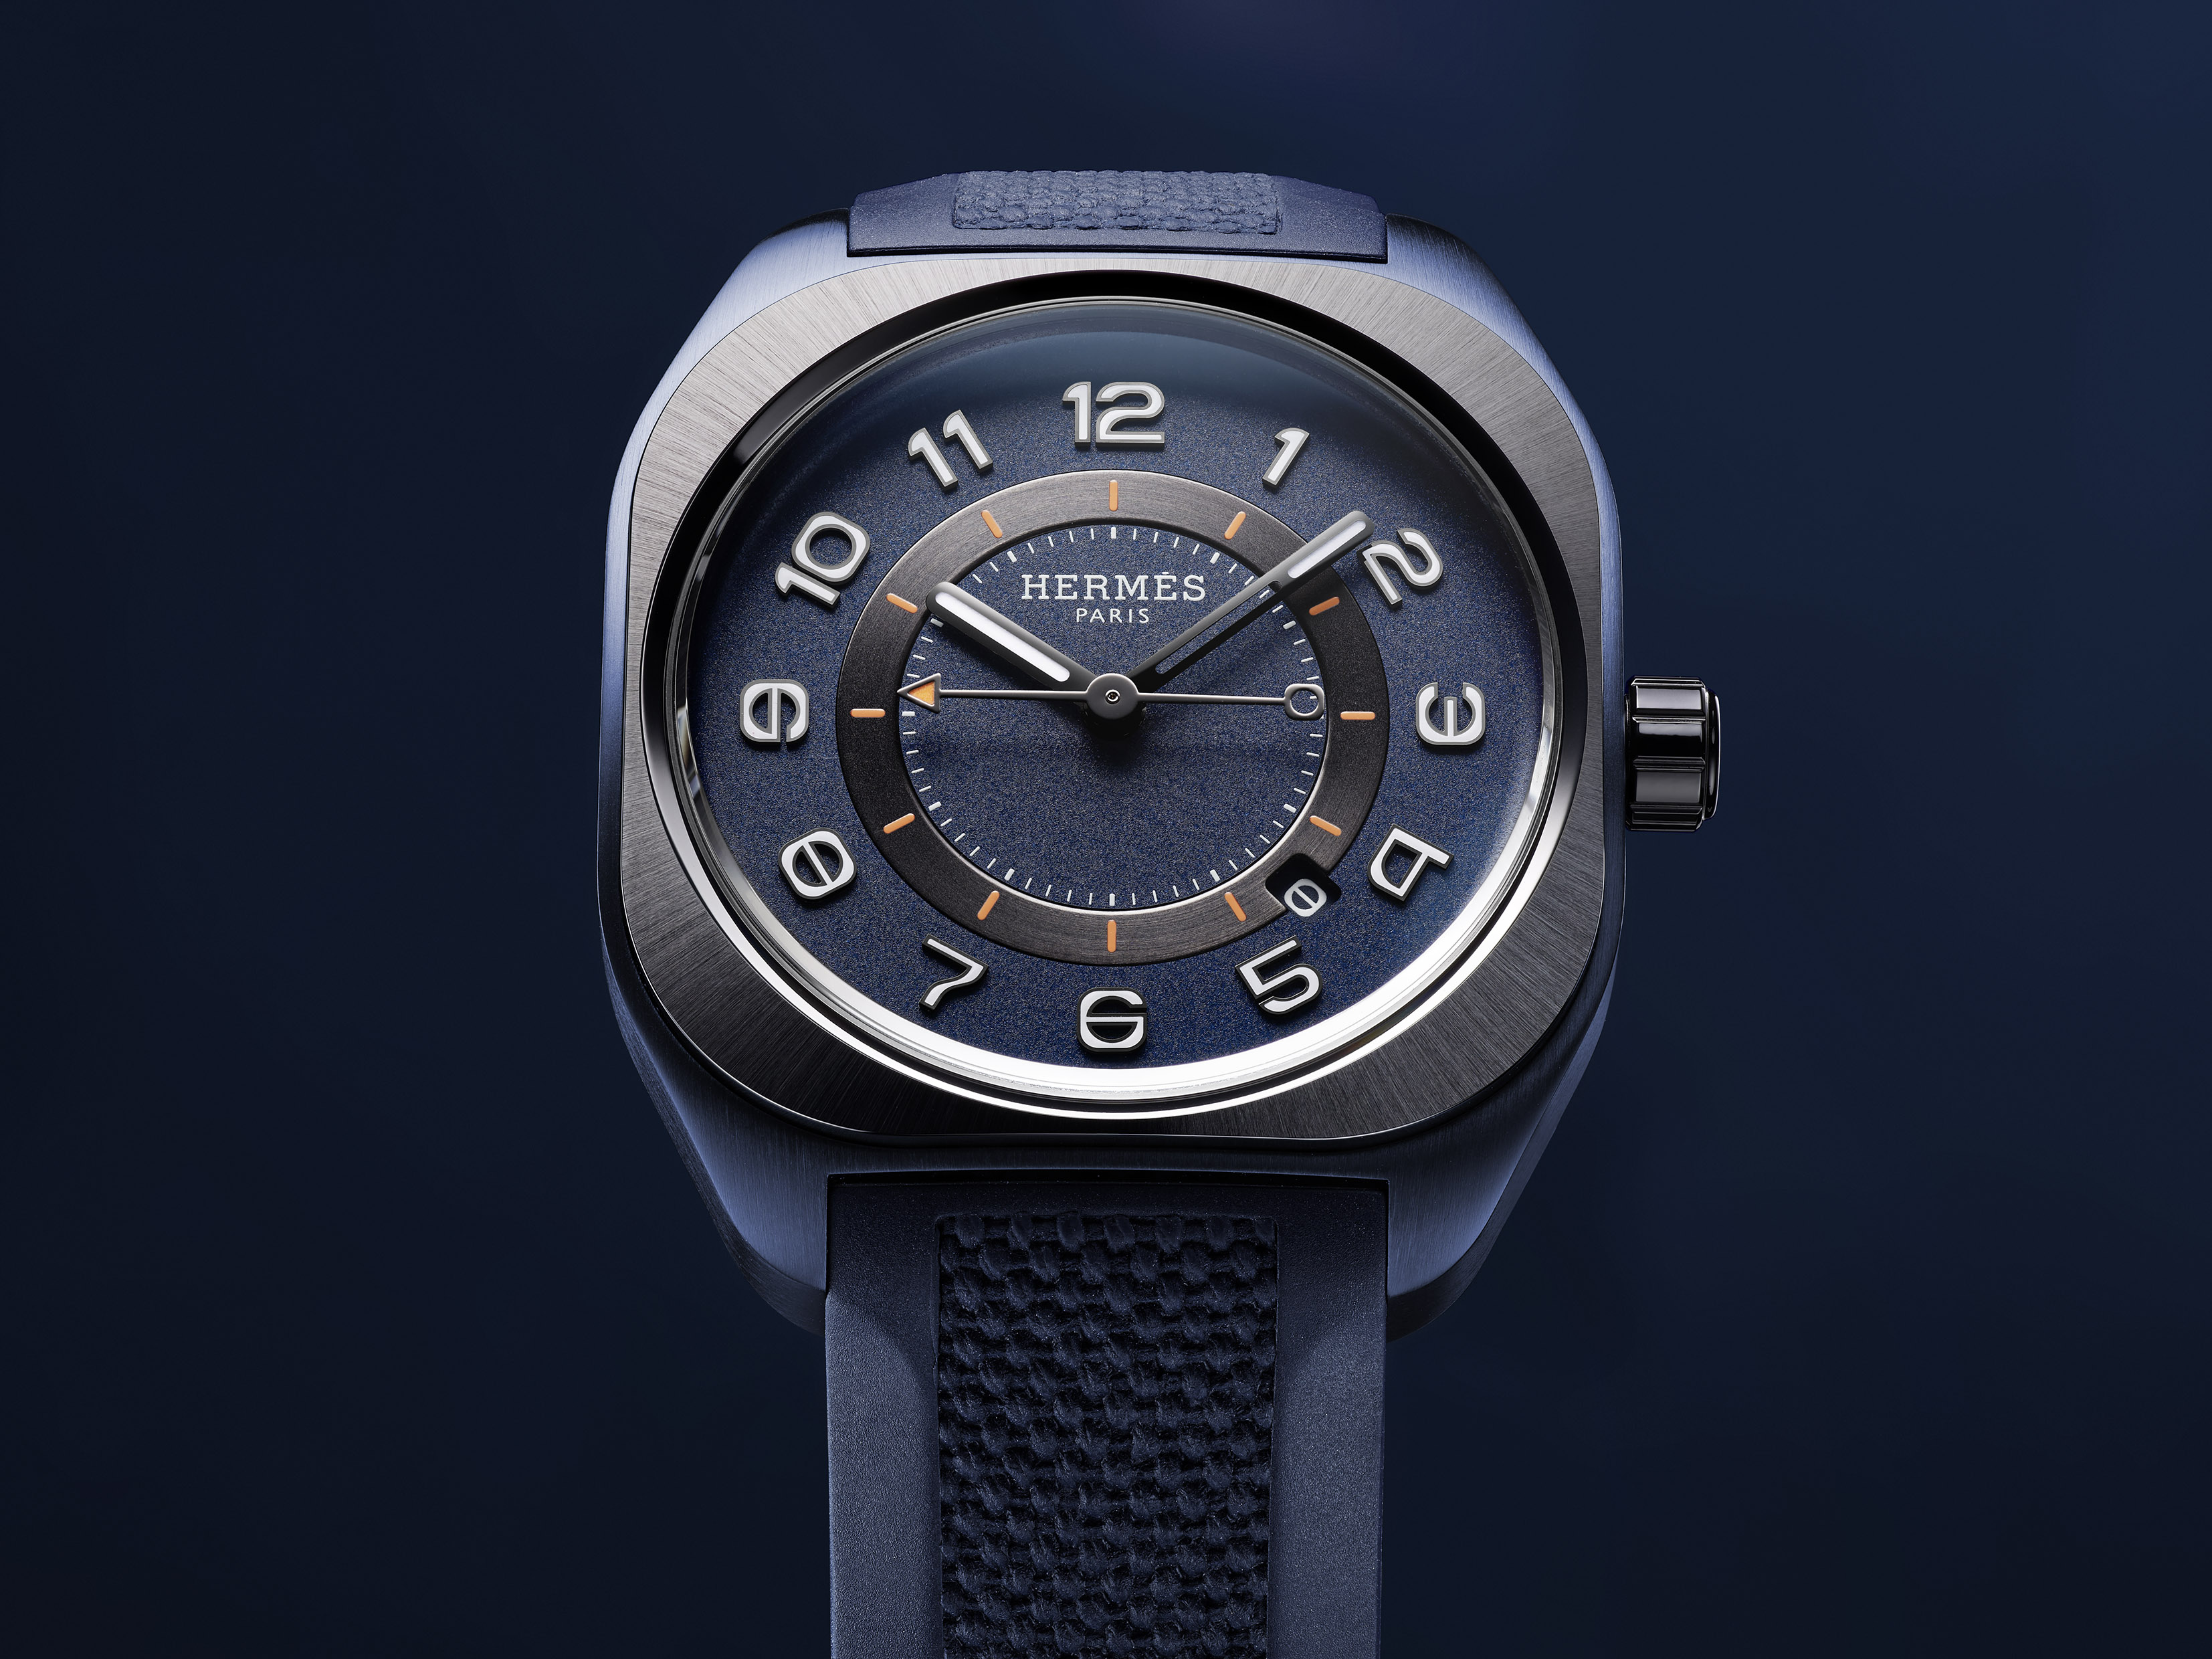 The Hermès H08 Watch Never Looked So Good In Crisp Blue Titanium